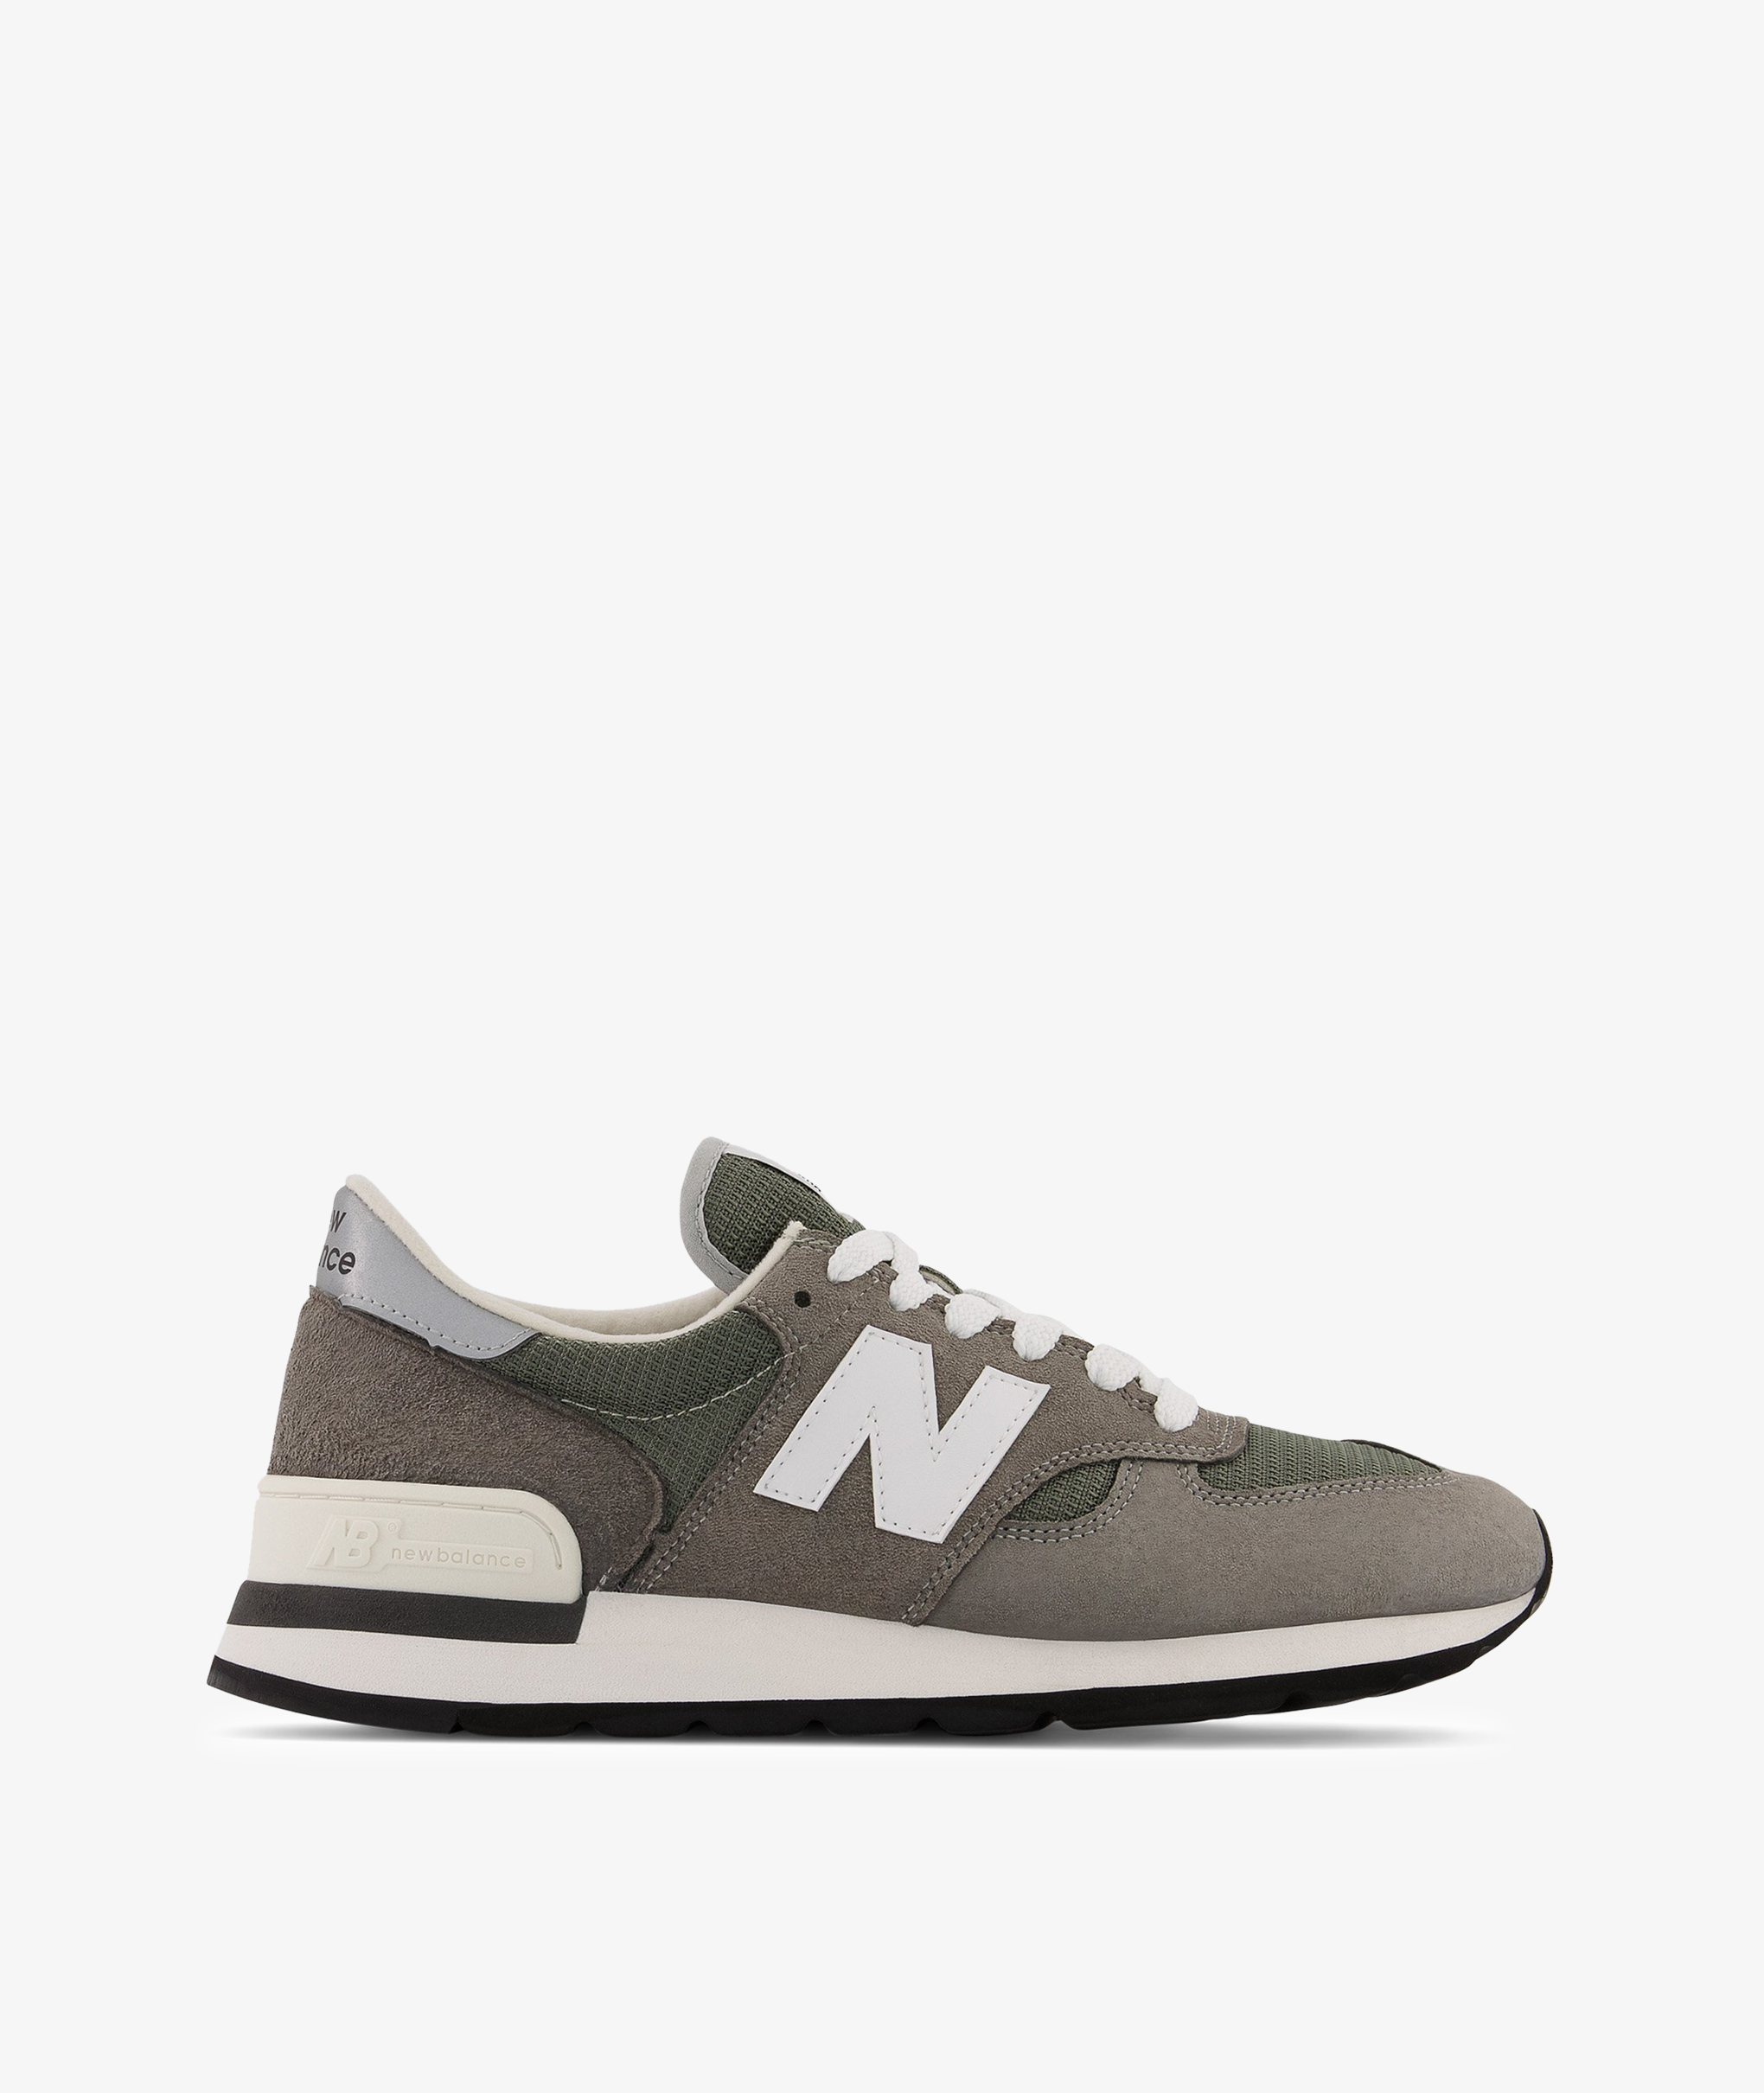 Norse Store | Shipping Worldwide - New Balance M990GR1 - Grey/White